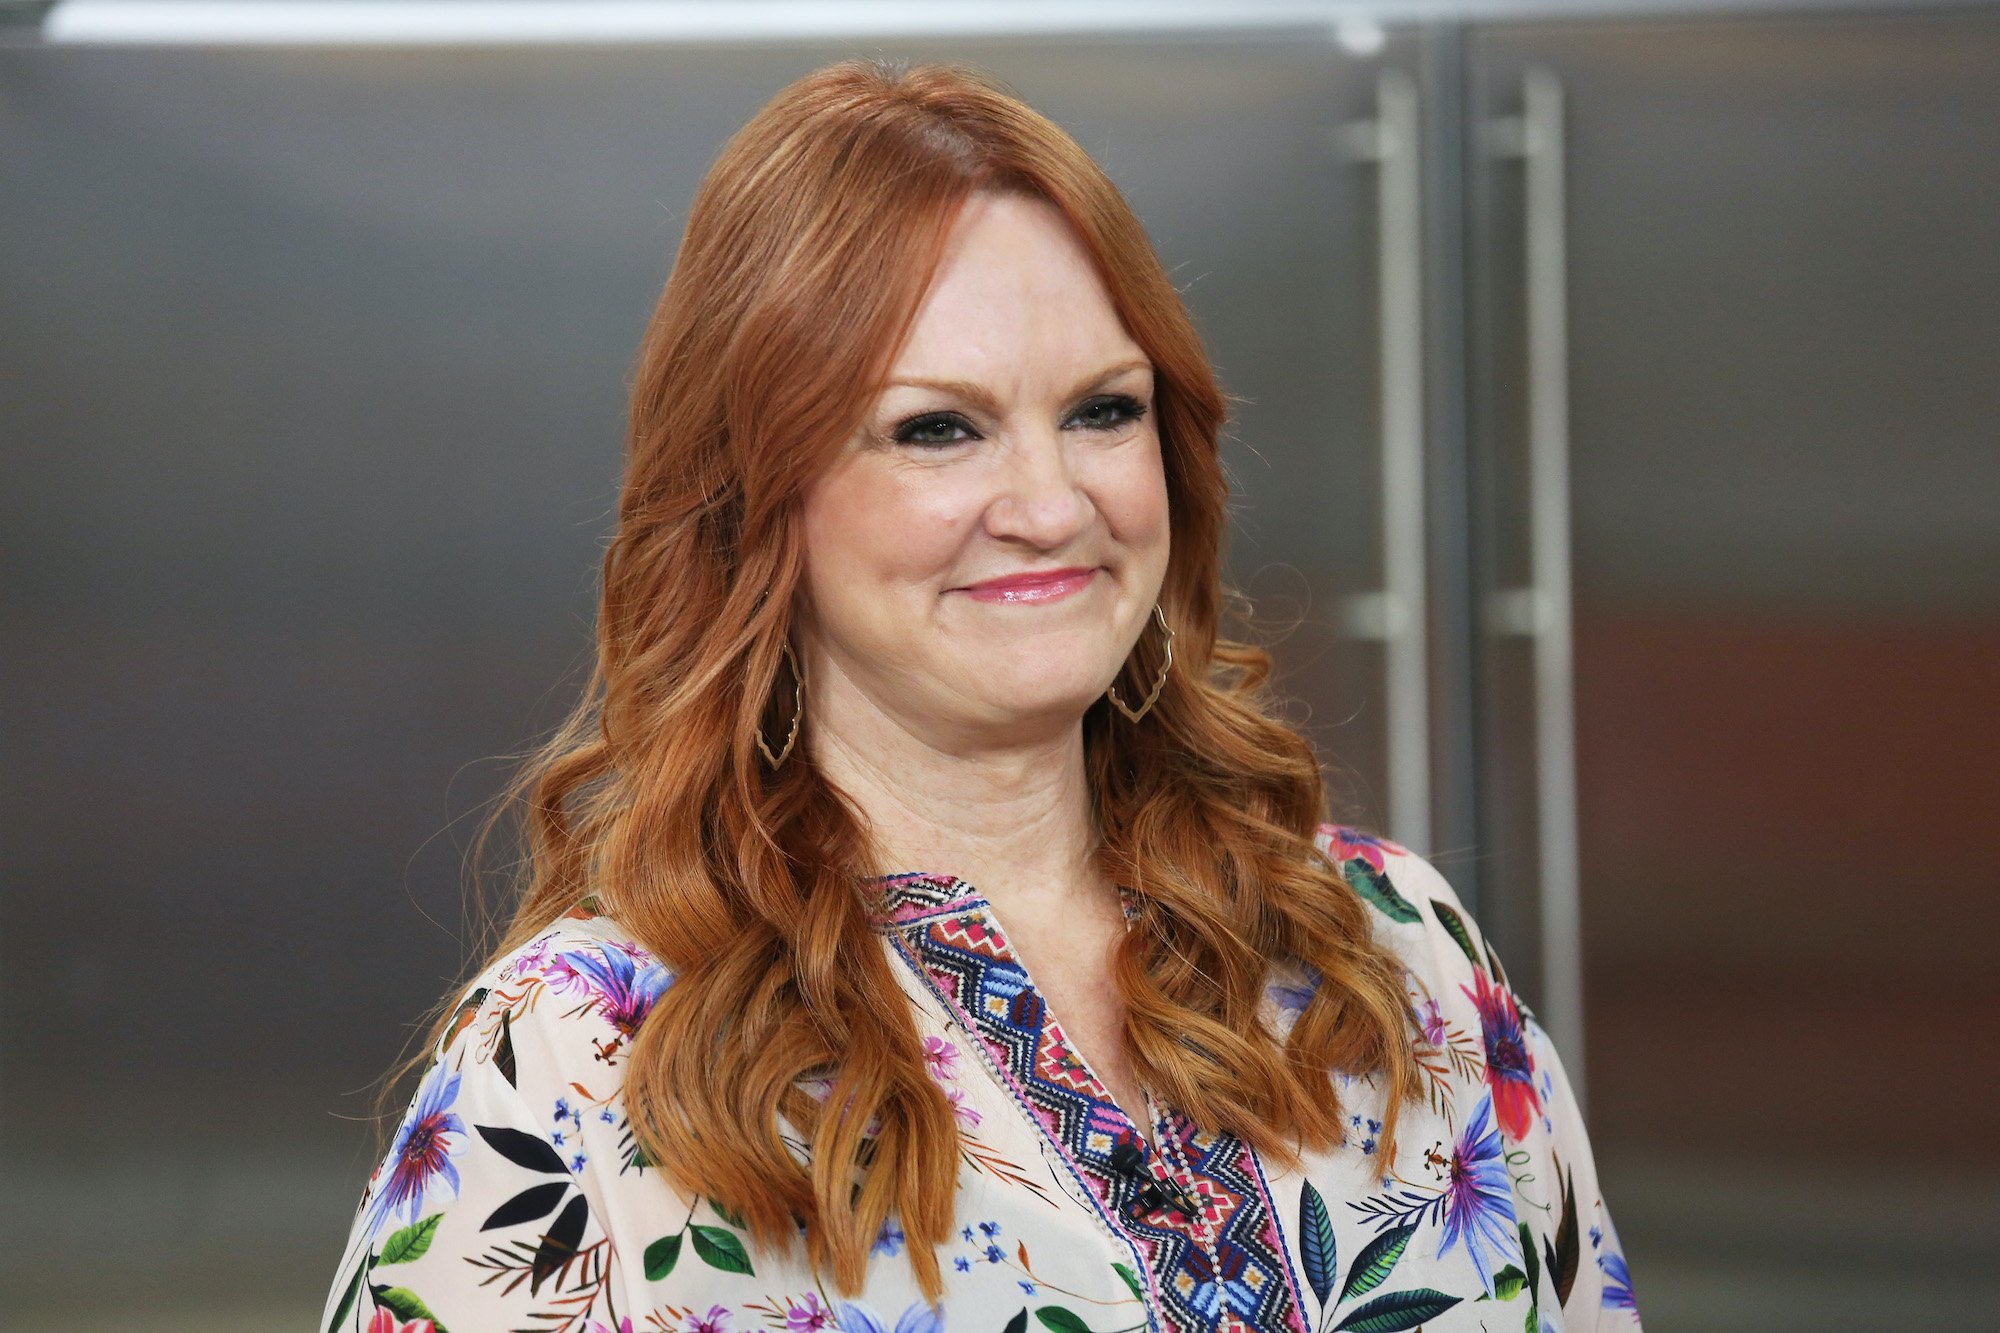 Ree Drummond star of 'The Pioneer Woman' wears a brightly colored top and smiles on the set of 'Today' on October 22, 2019